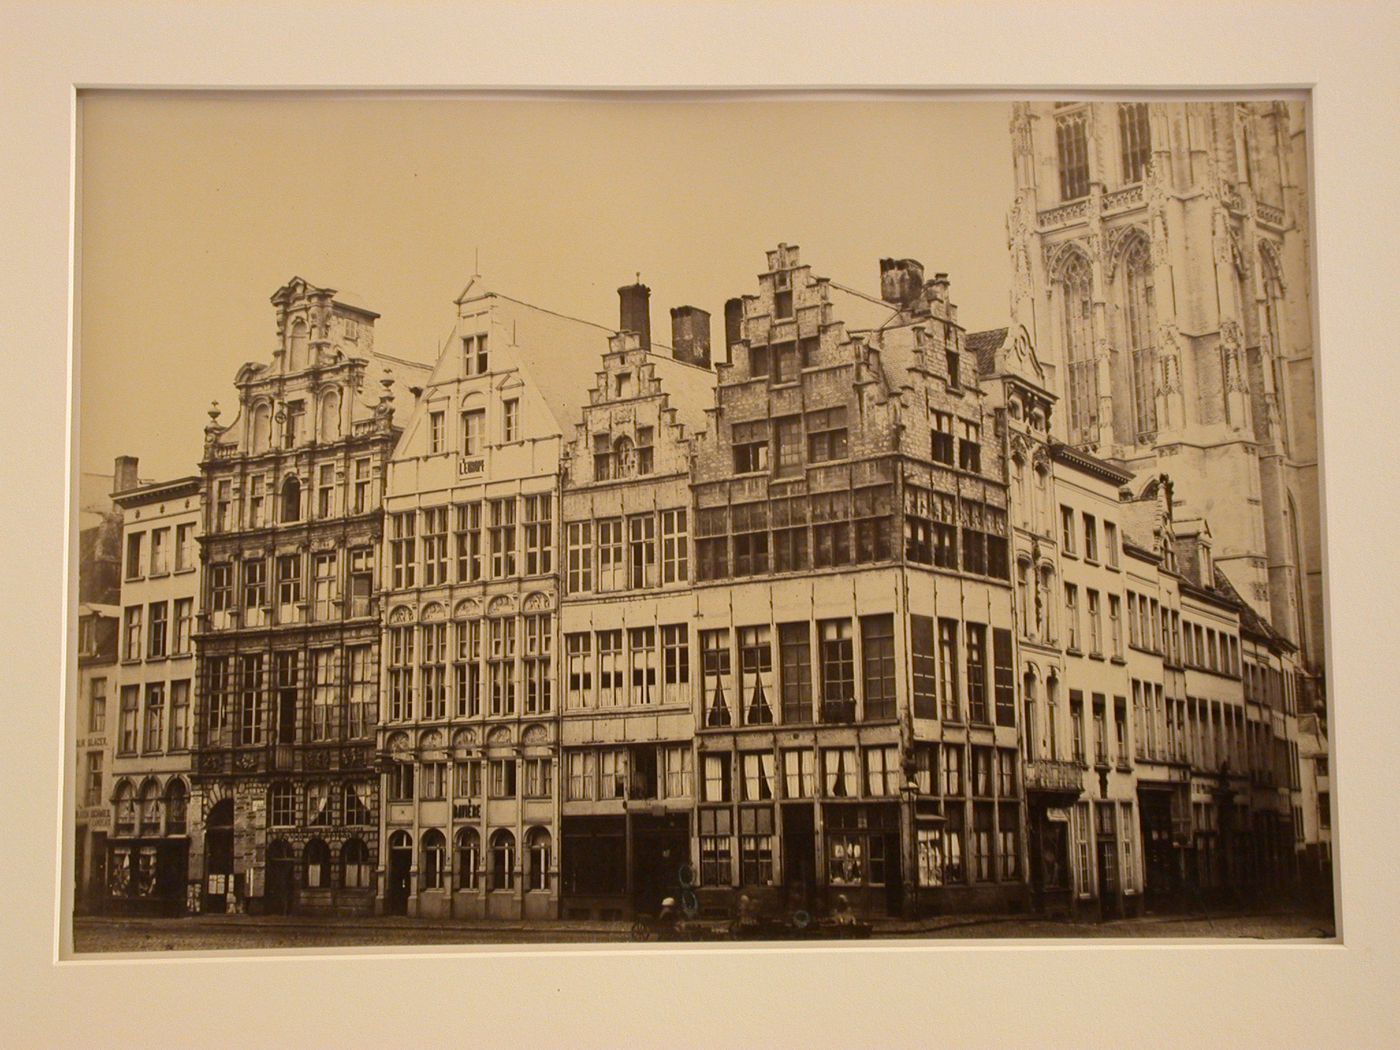 Exterior view, façades of guild houses on a square, and intersecting street, with part of church tower in background, Antwerp, Belgium